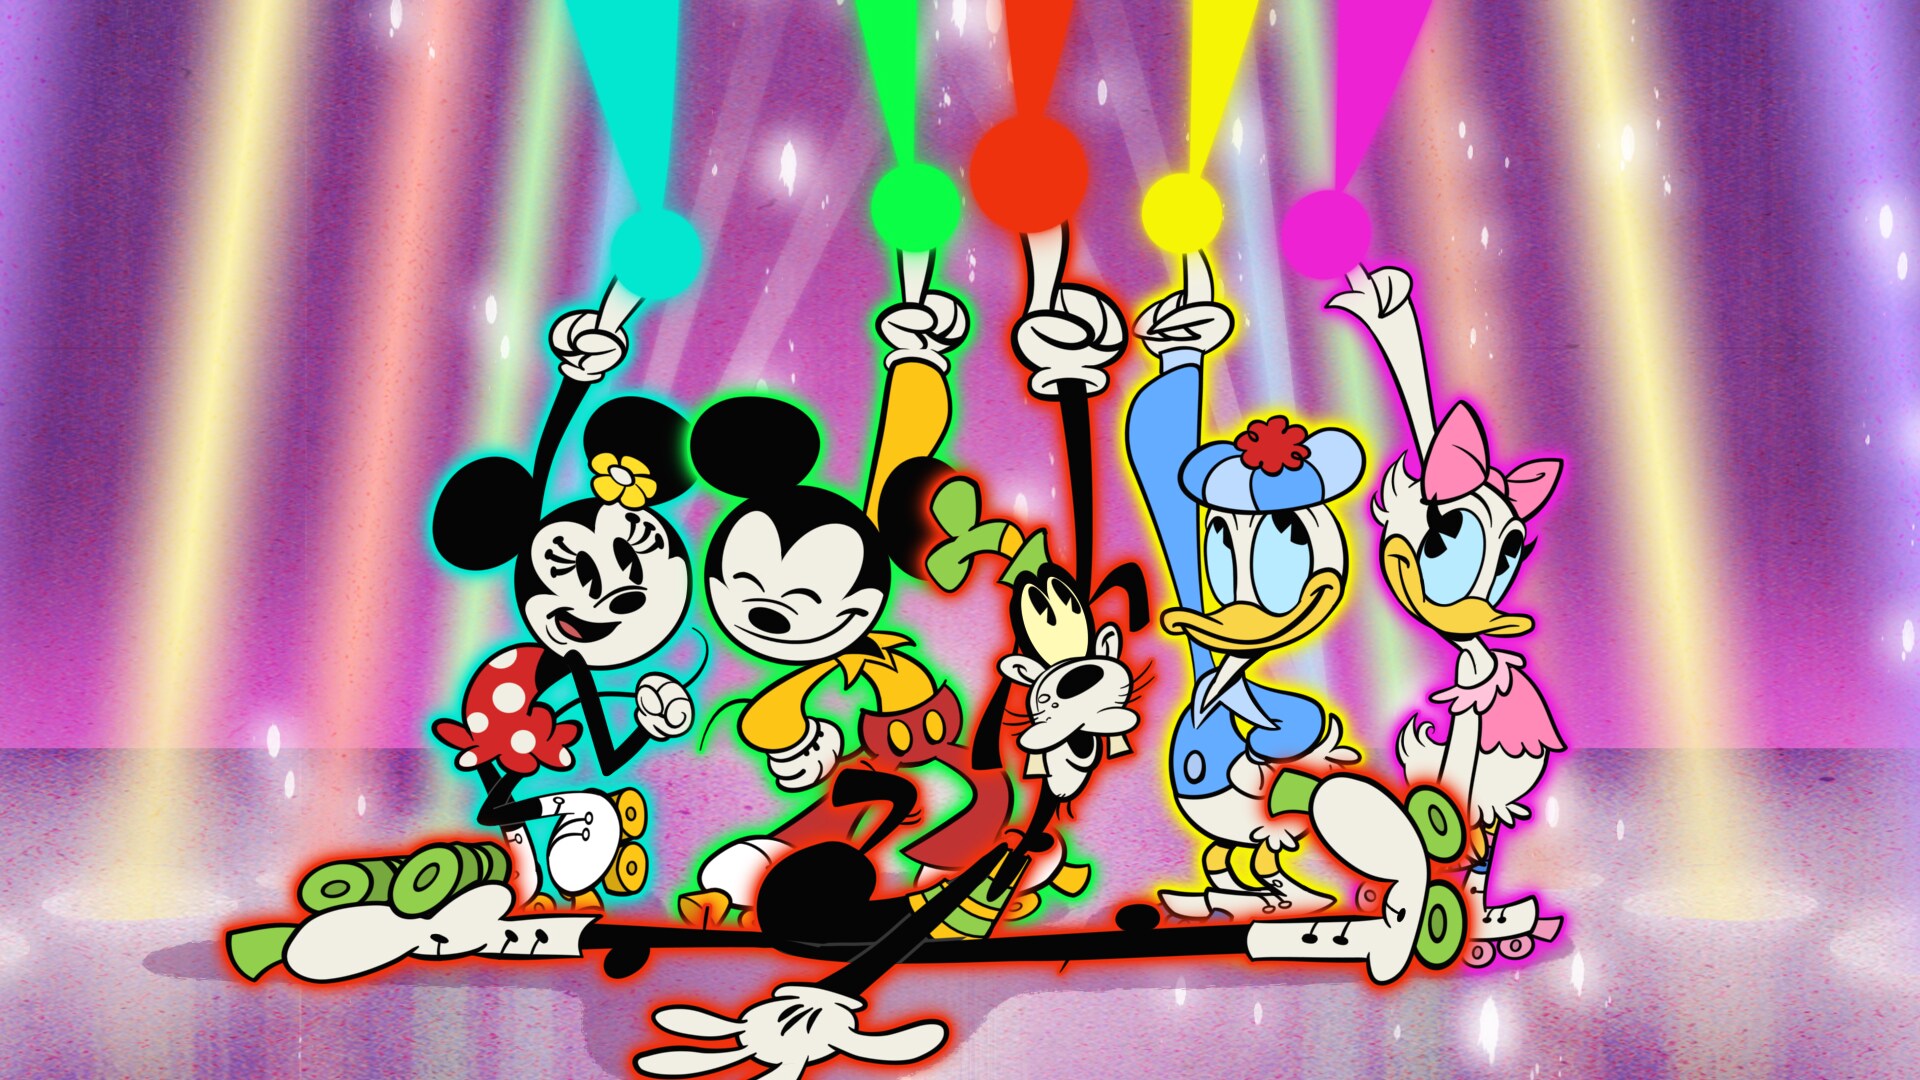 THE WONDERFUL WORLD OF MICKEY MOUSE - "Starlight Nights" - Mickey and his friends' disco night at the roller rink is placed in peril when Peg-Leg Pete and his gang crash the party and ruin the fun. (Disney+) MINNIE MOUSE, MICKEY MOUSE, GOOFY, DONALD DUCK, DAISY DUCK